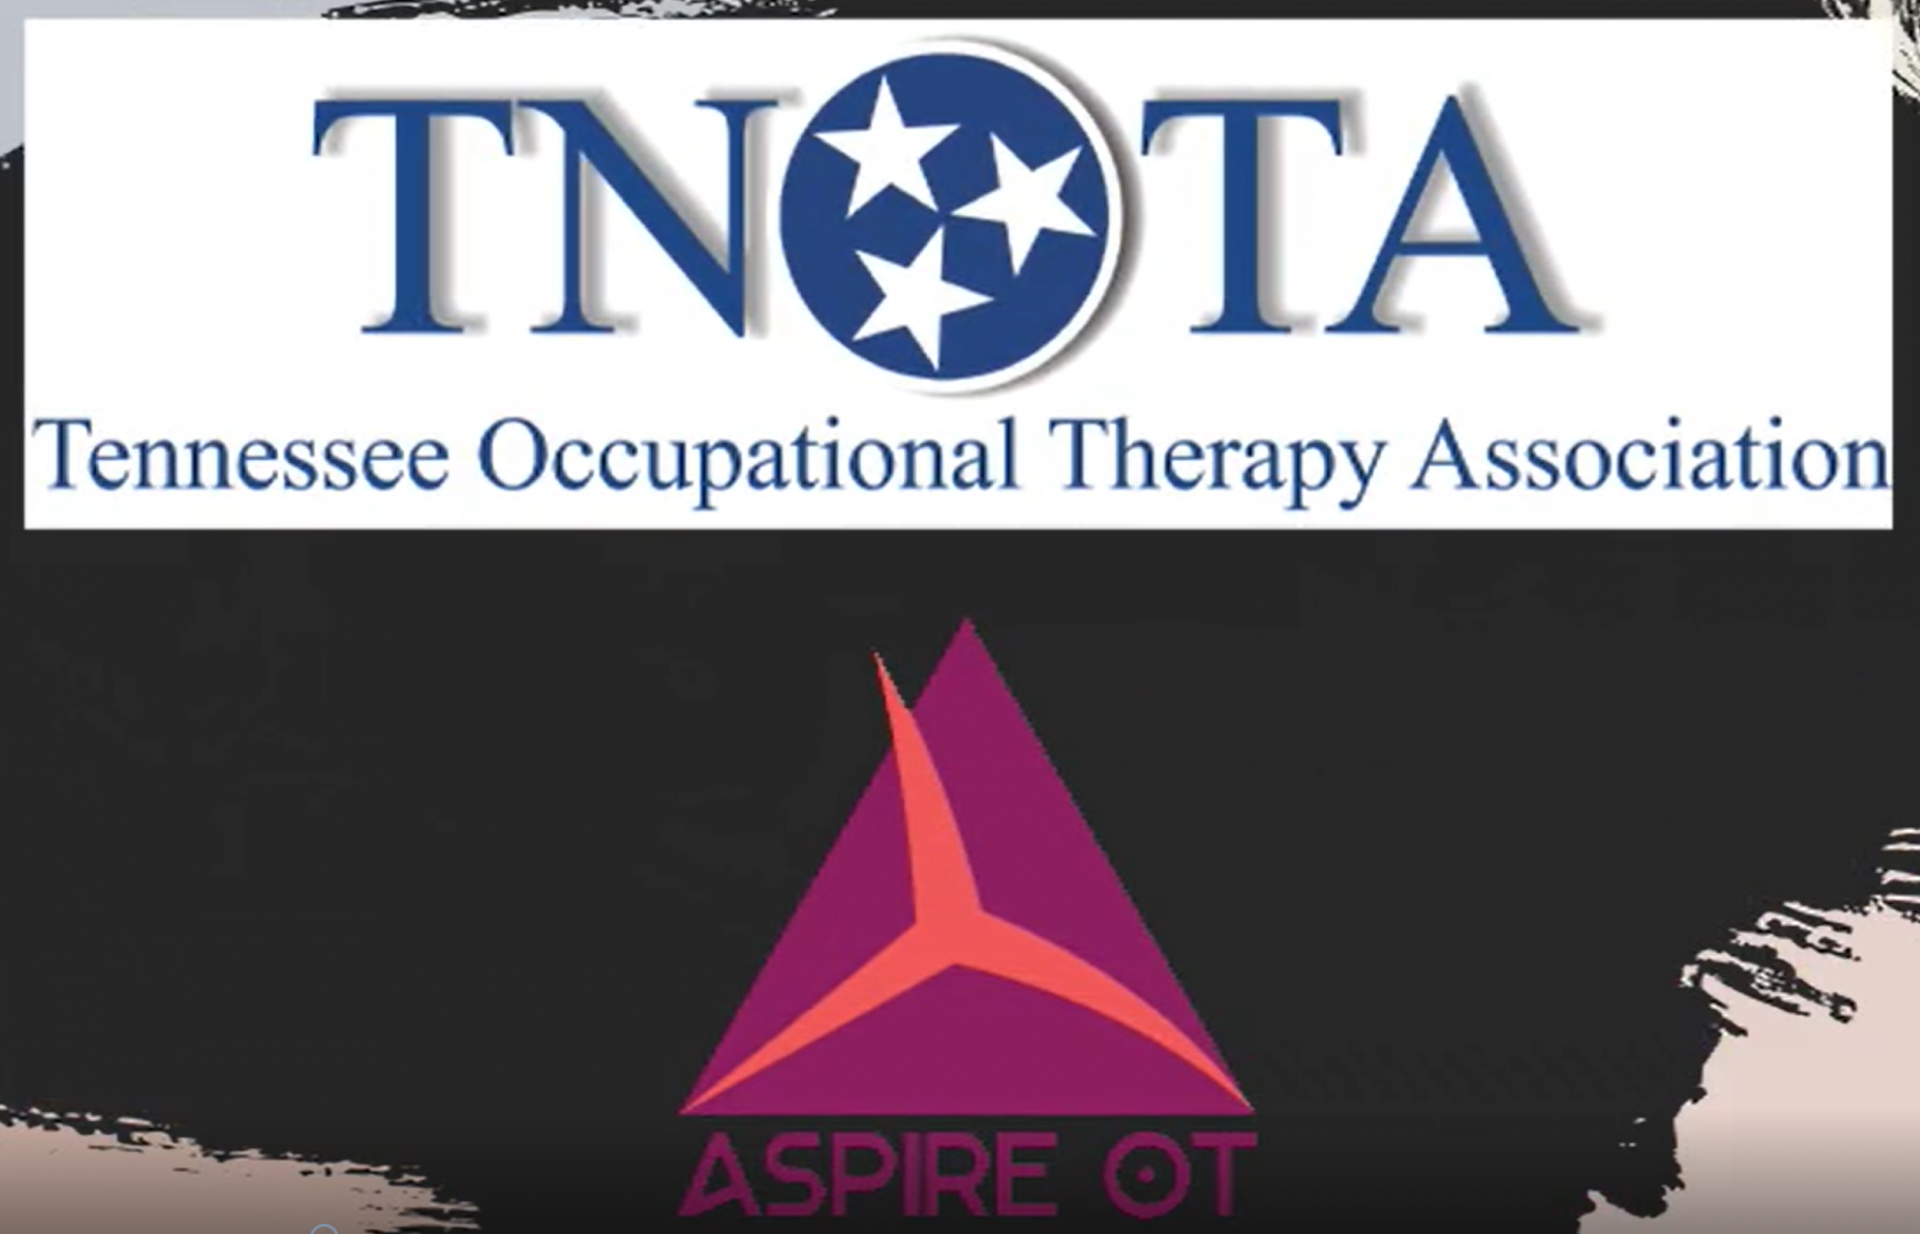 image with logos for TNOTA and Aspire OT